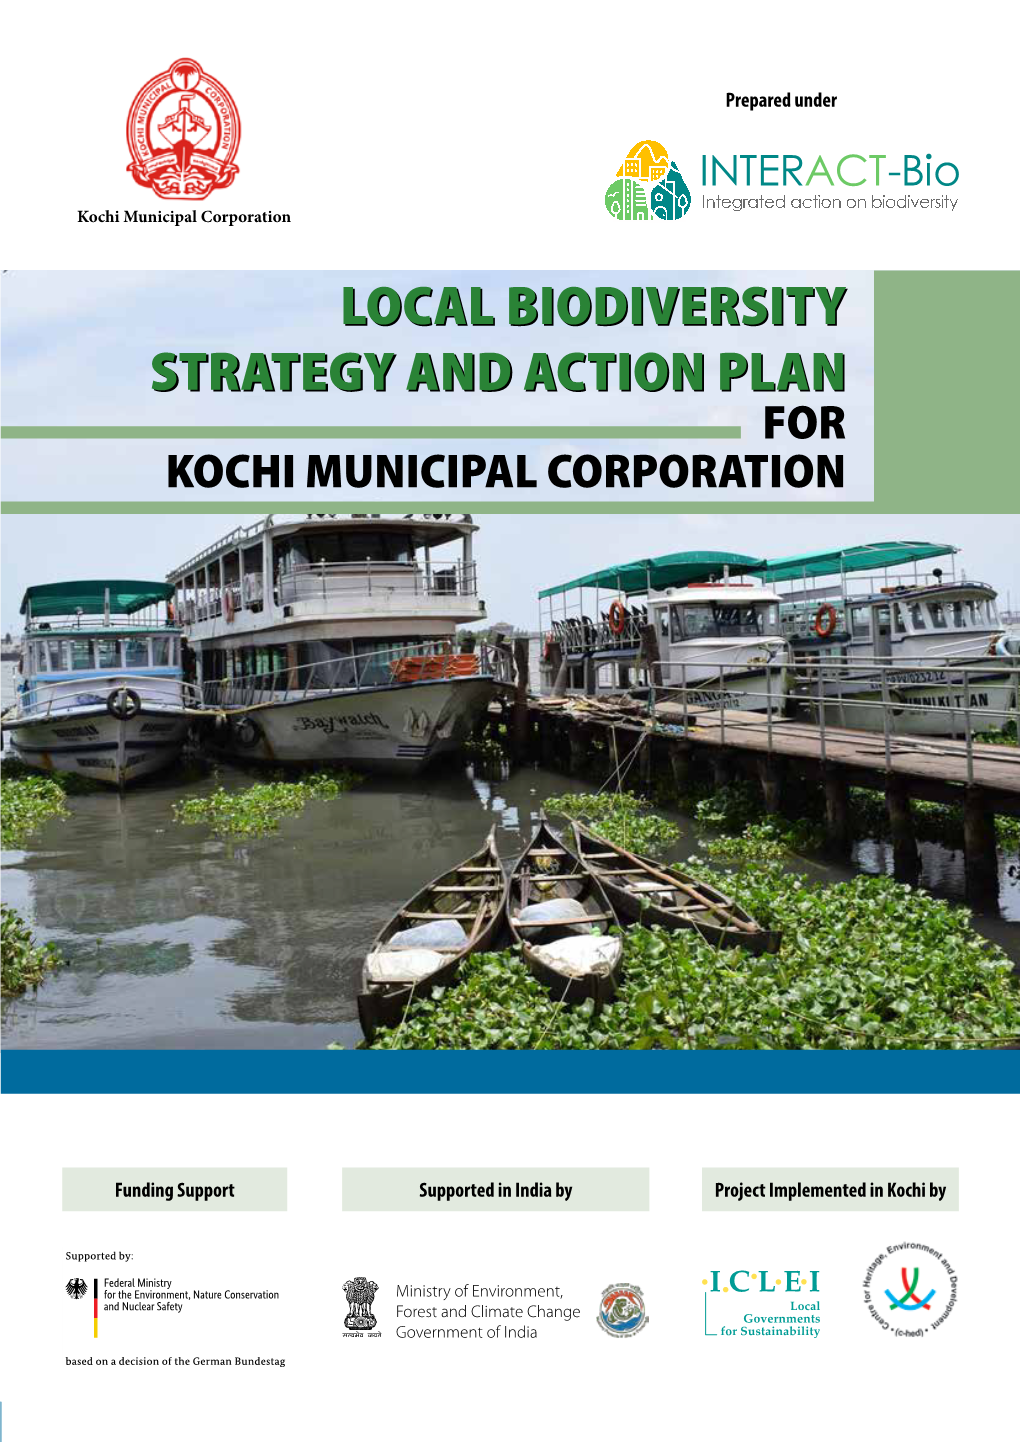 Local Biodiversity Strategy and Action Plan for Kochi Municipal Corporation